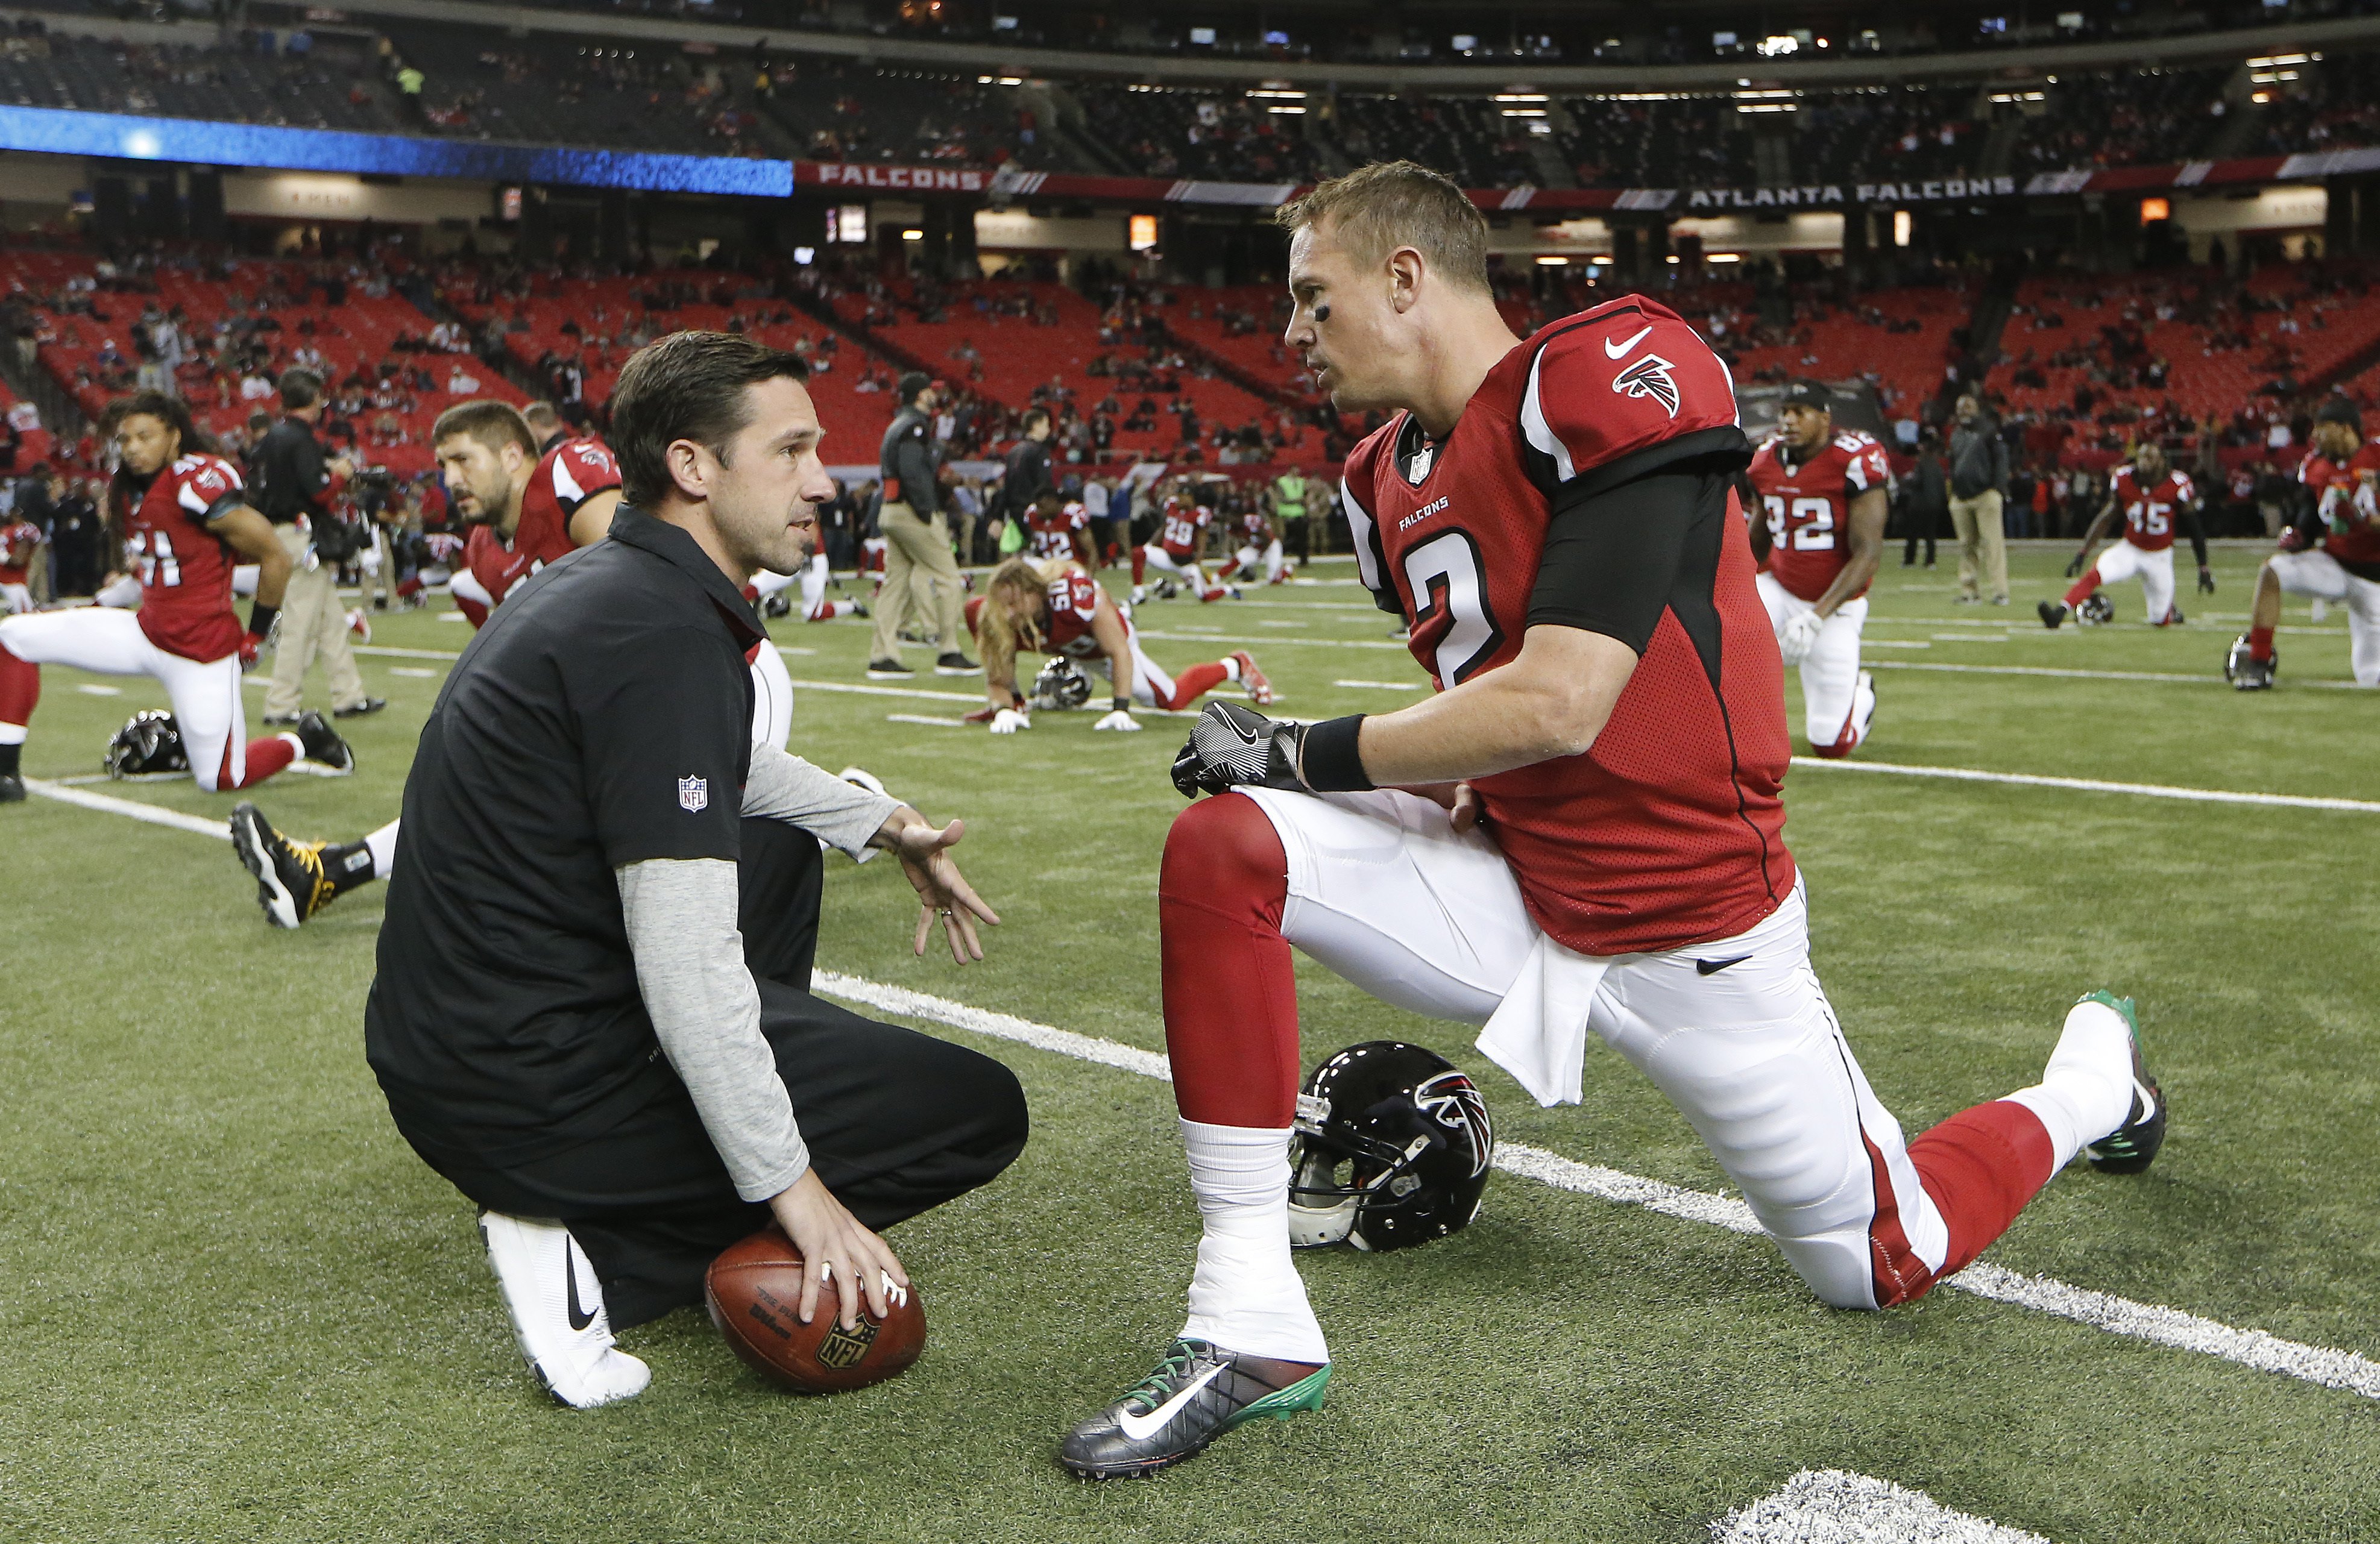 Falcons collapse on NFL's biggest stage